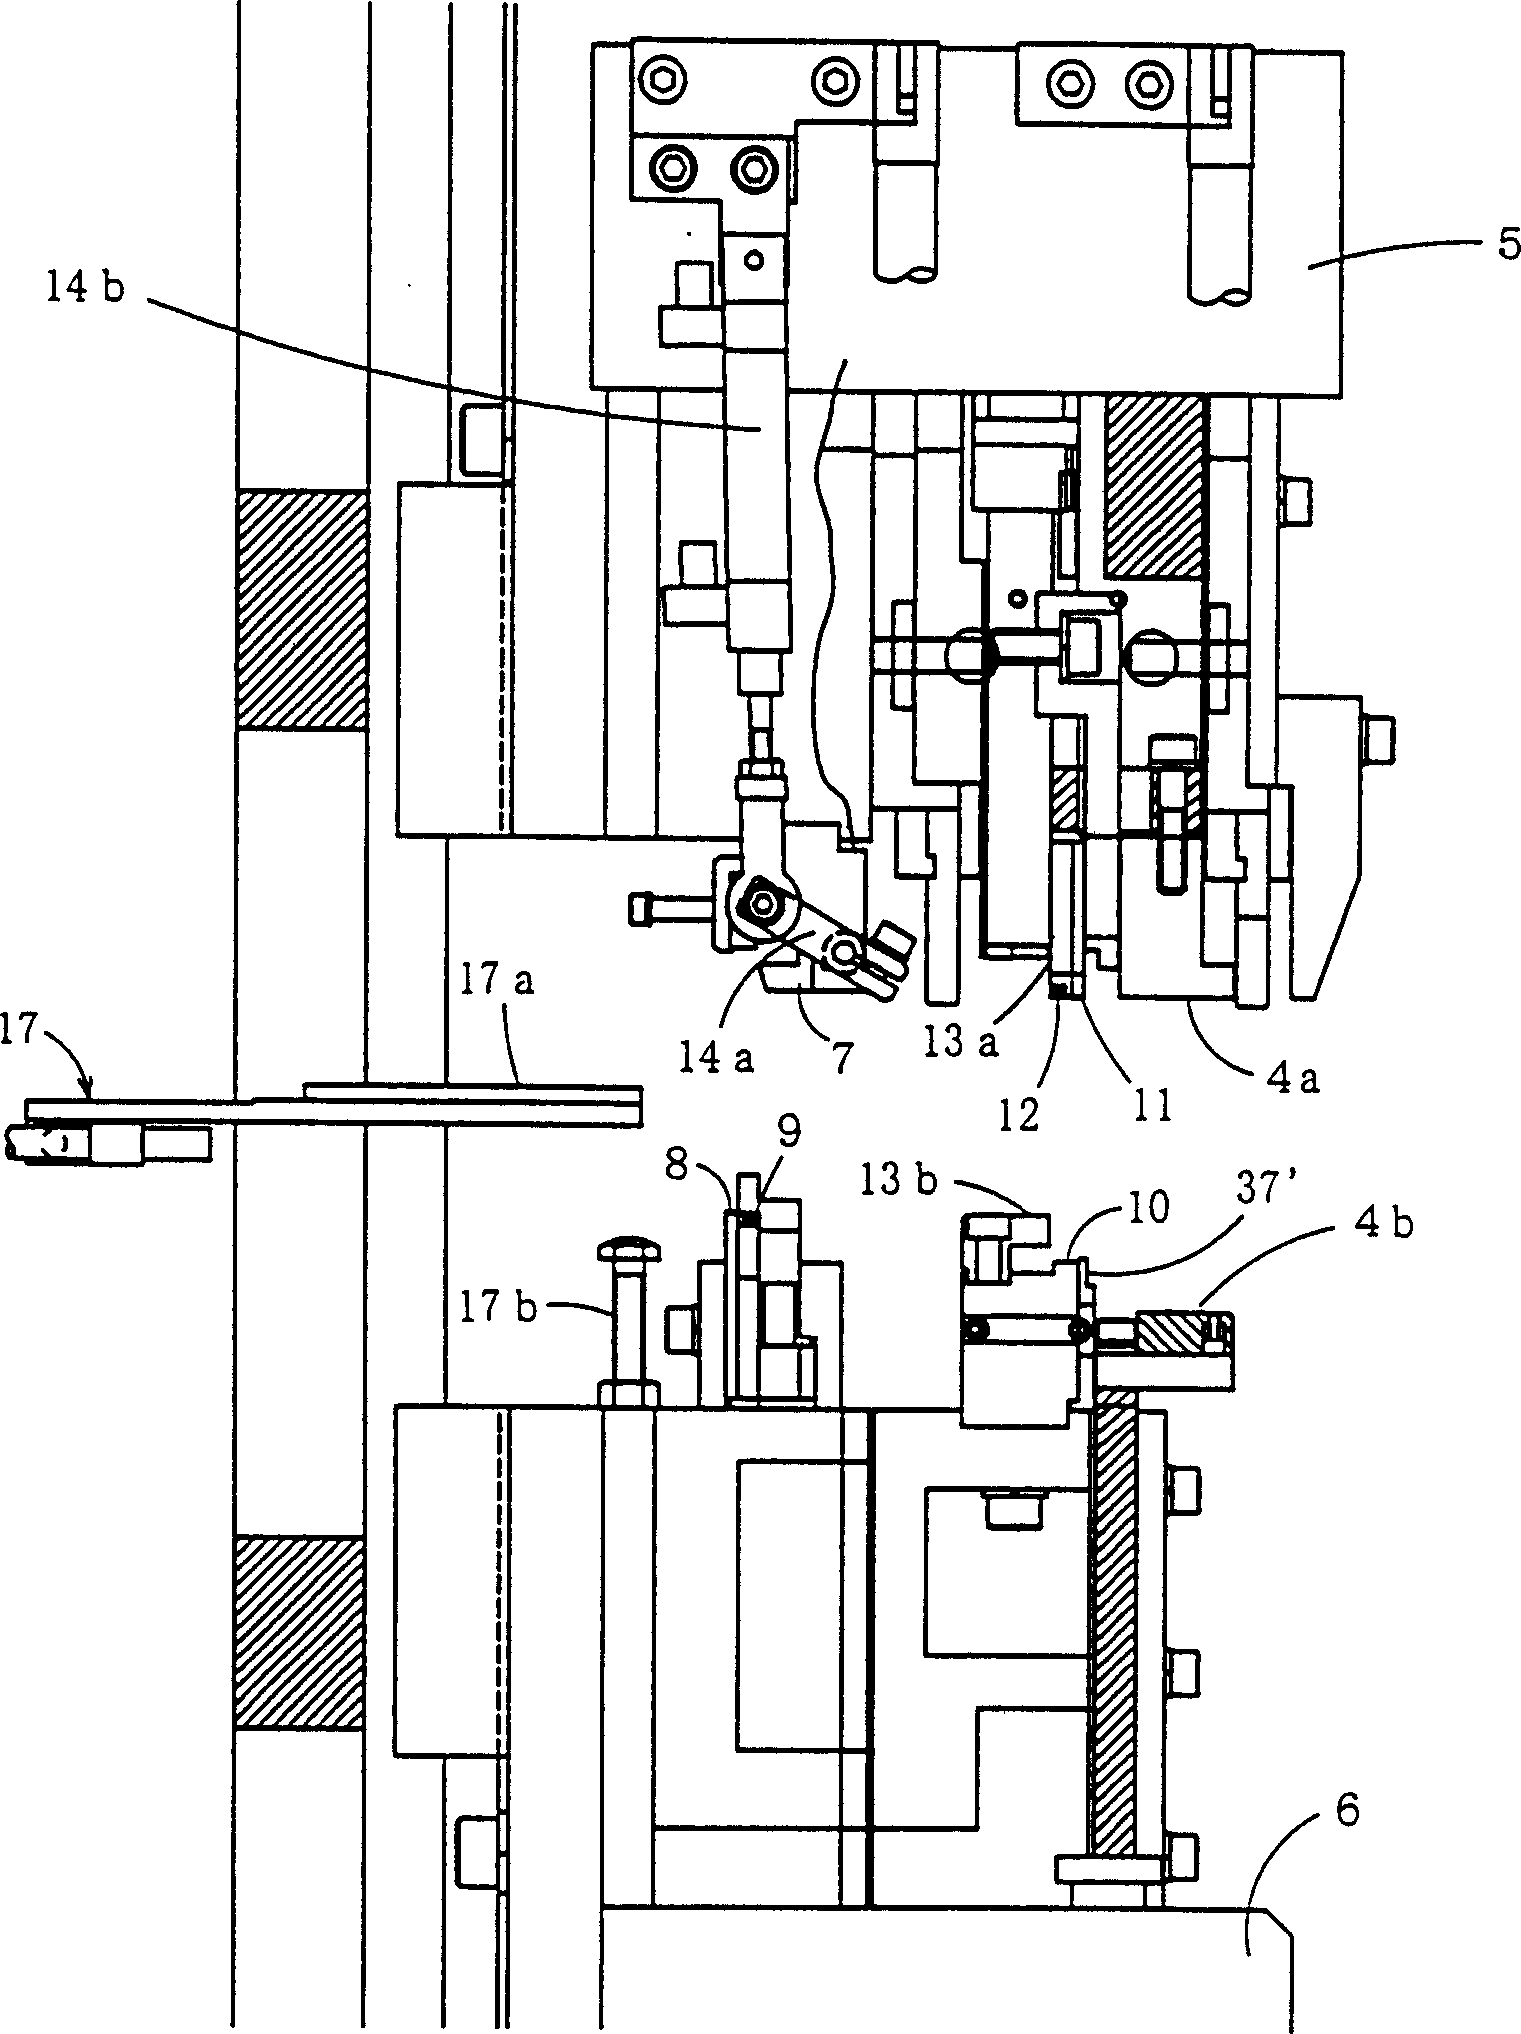 Combined press welding table and automatic press welder provided with same